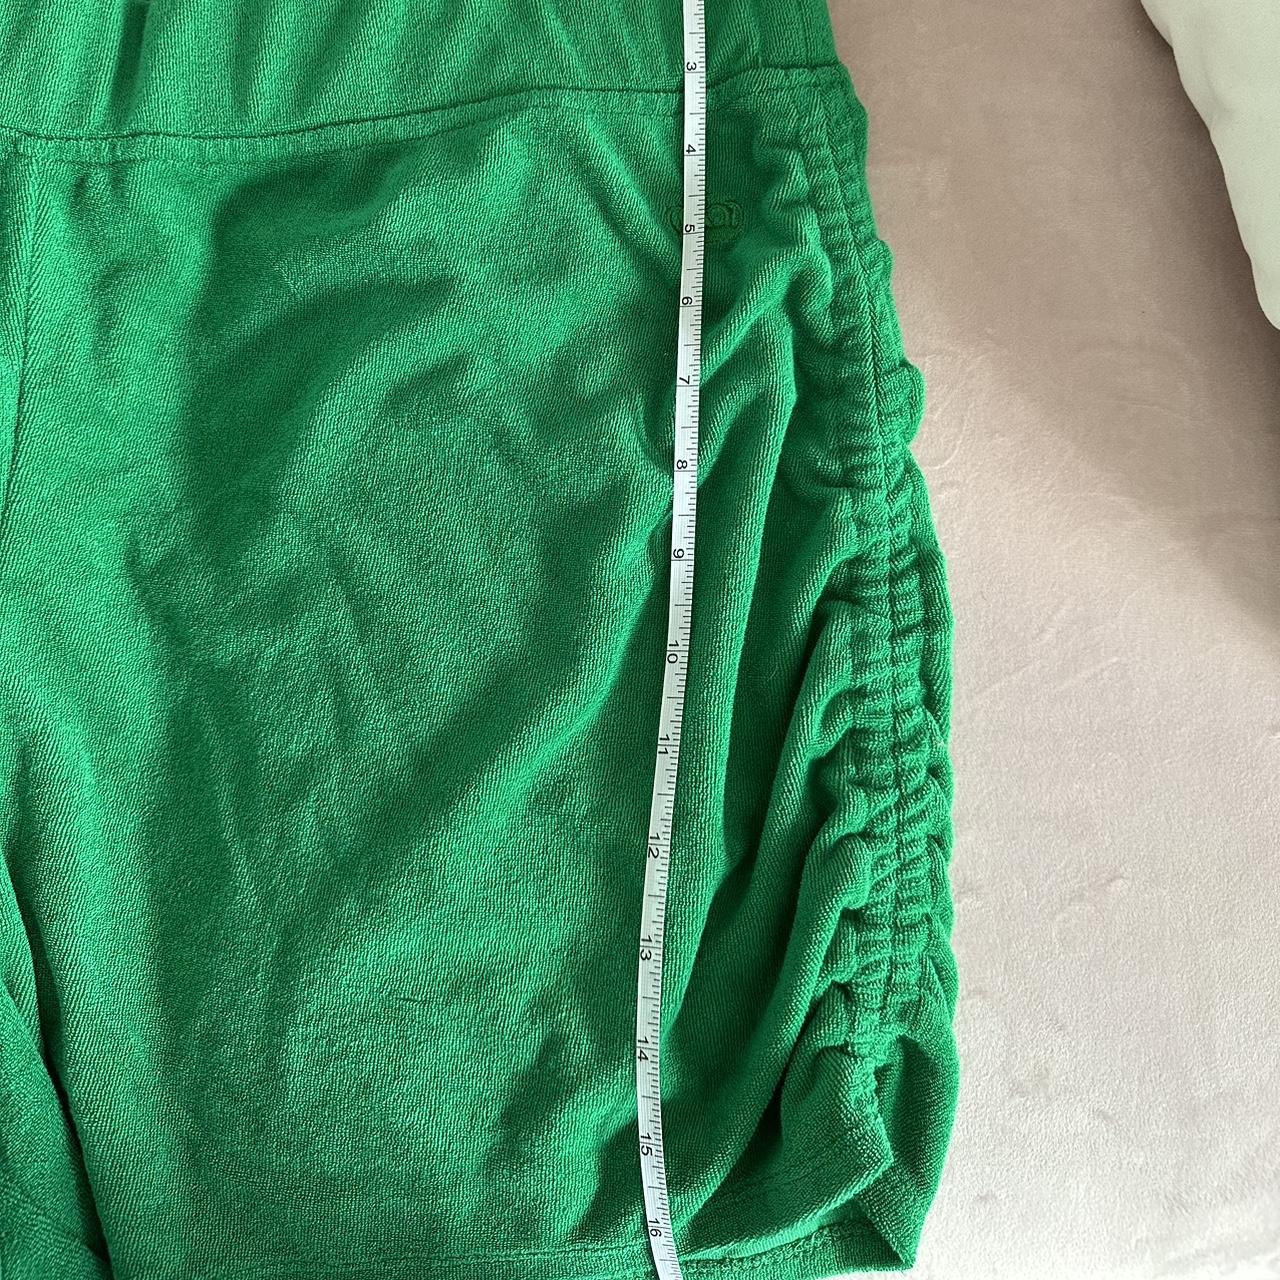 Juicy Couture boy shorts 5 pk NWT Brand new with - Depop